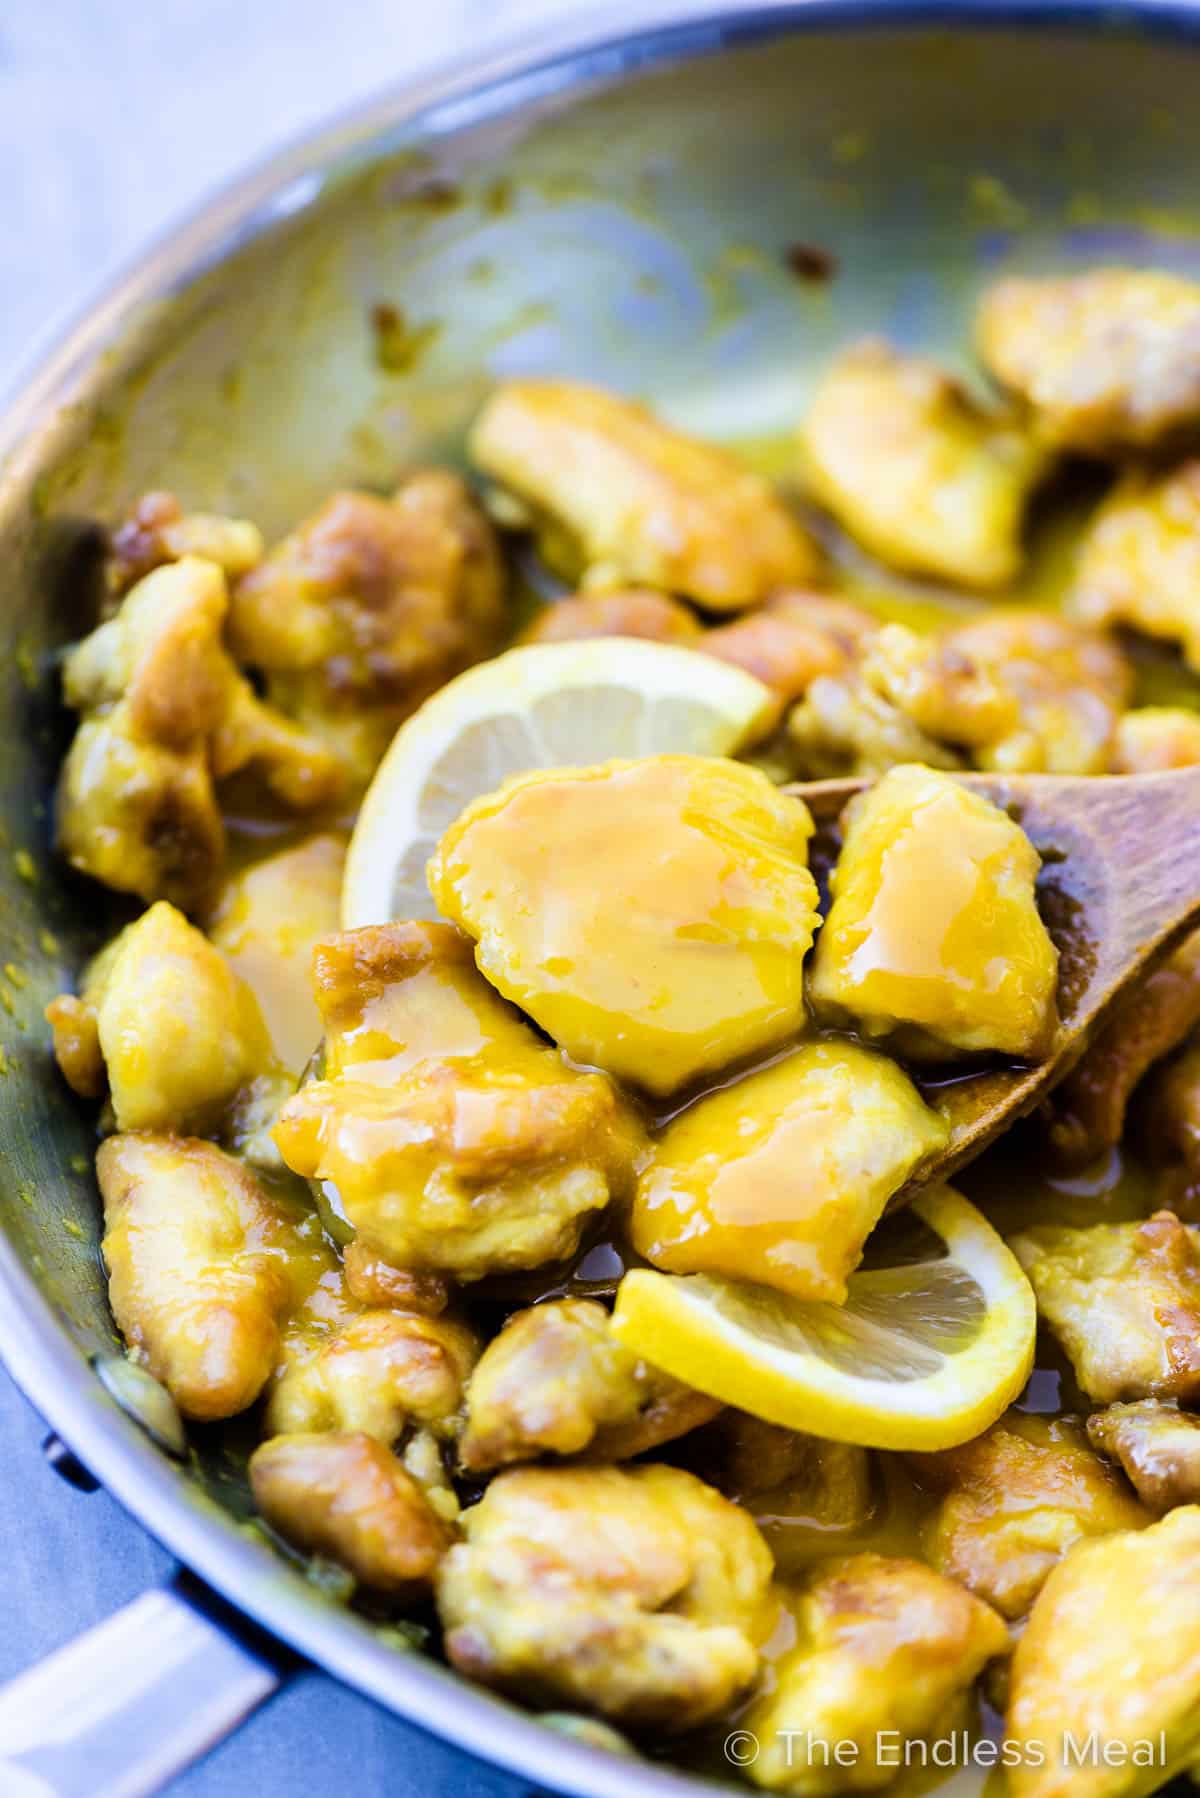 Tender chunks of lemon chicken with lots of sauce in a pan.